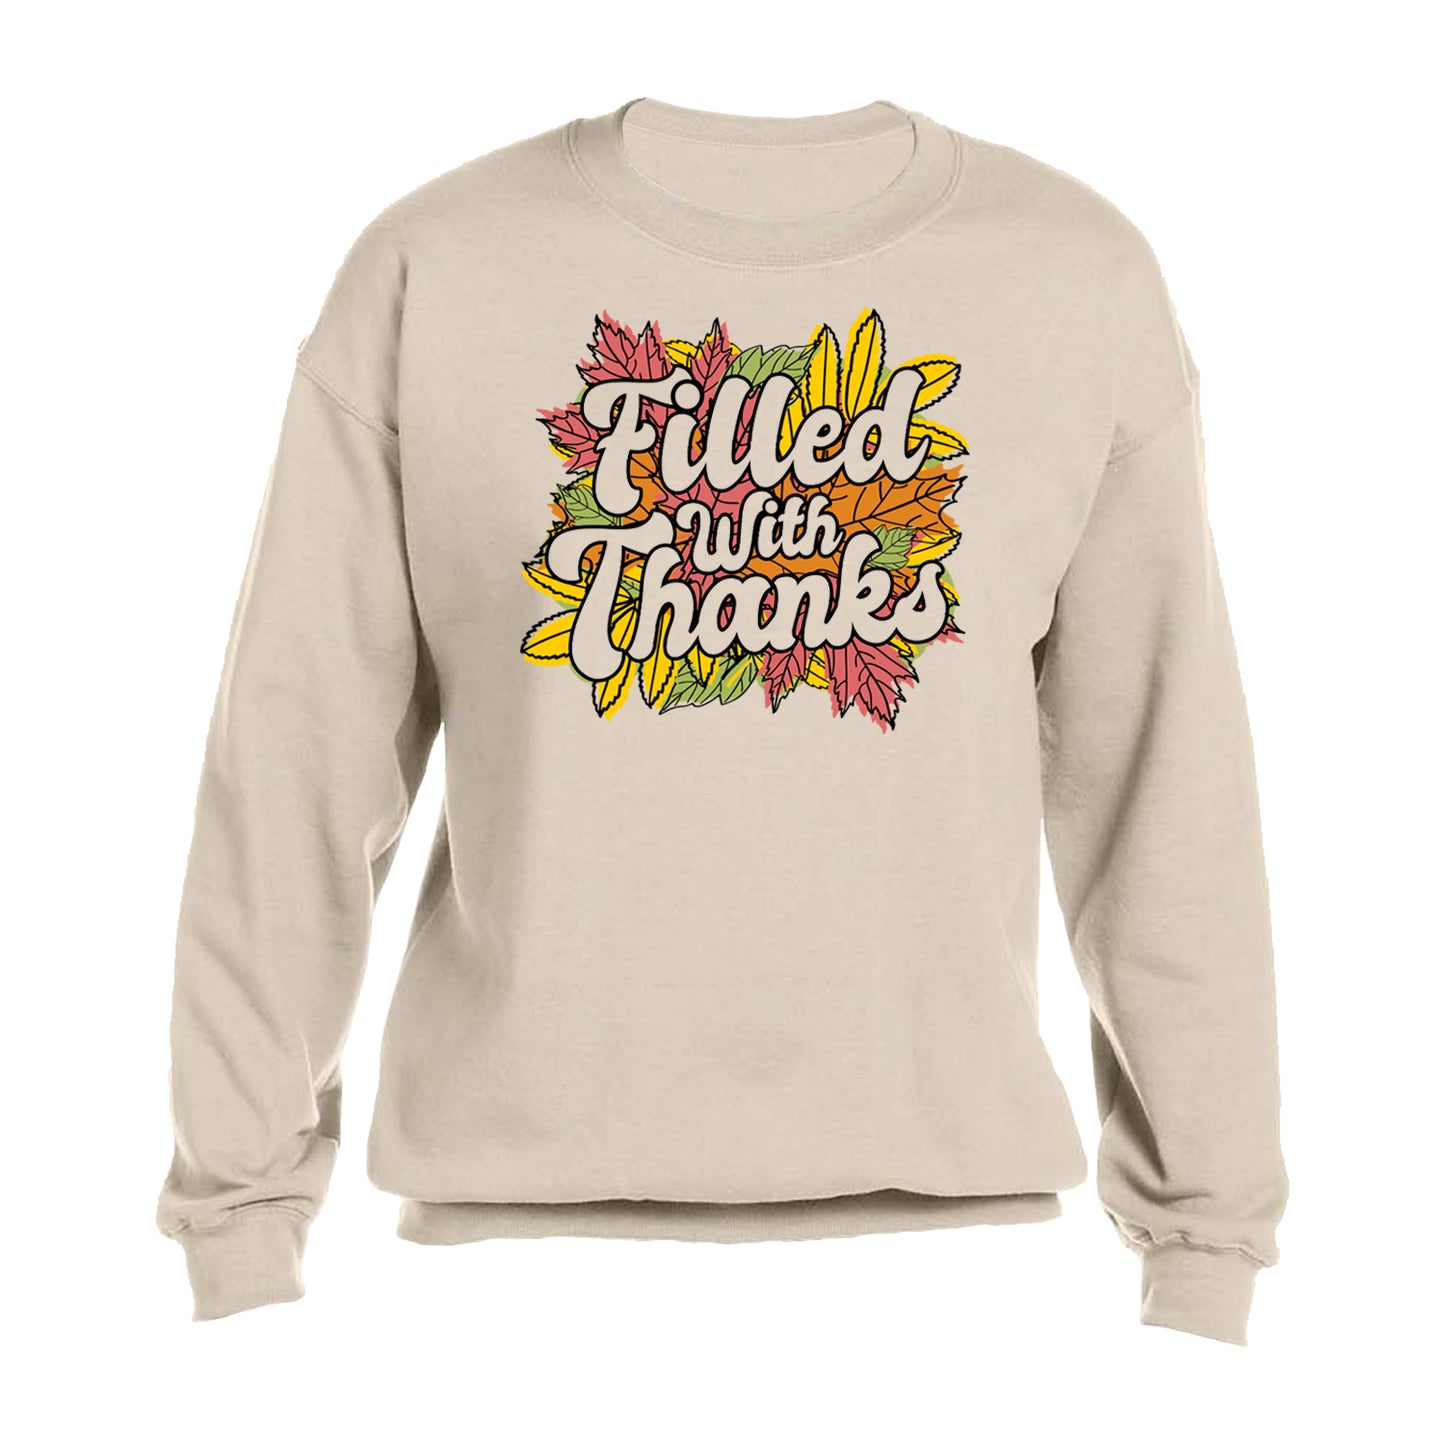 "Filled With Thanks" - Sweatshirt